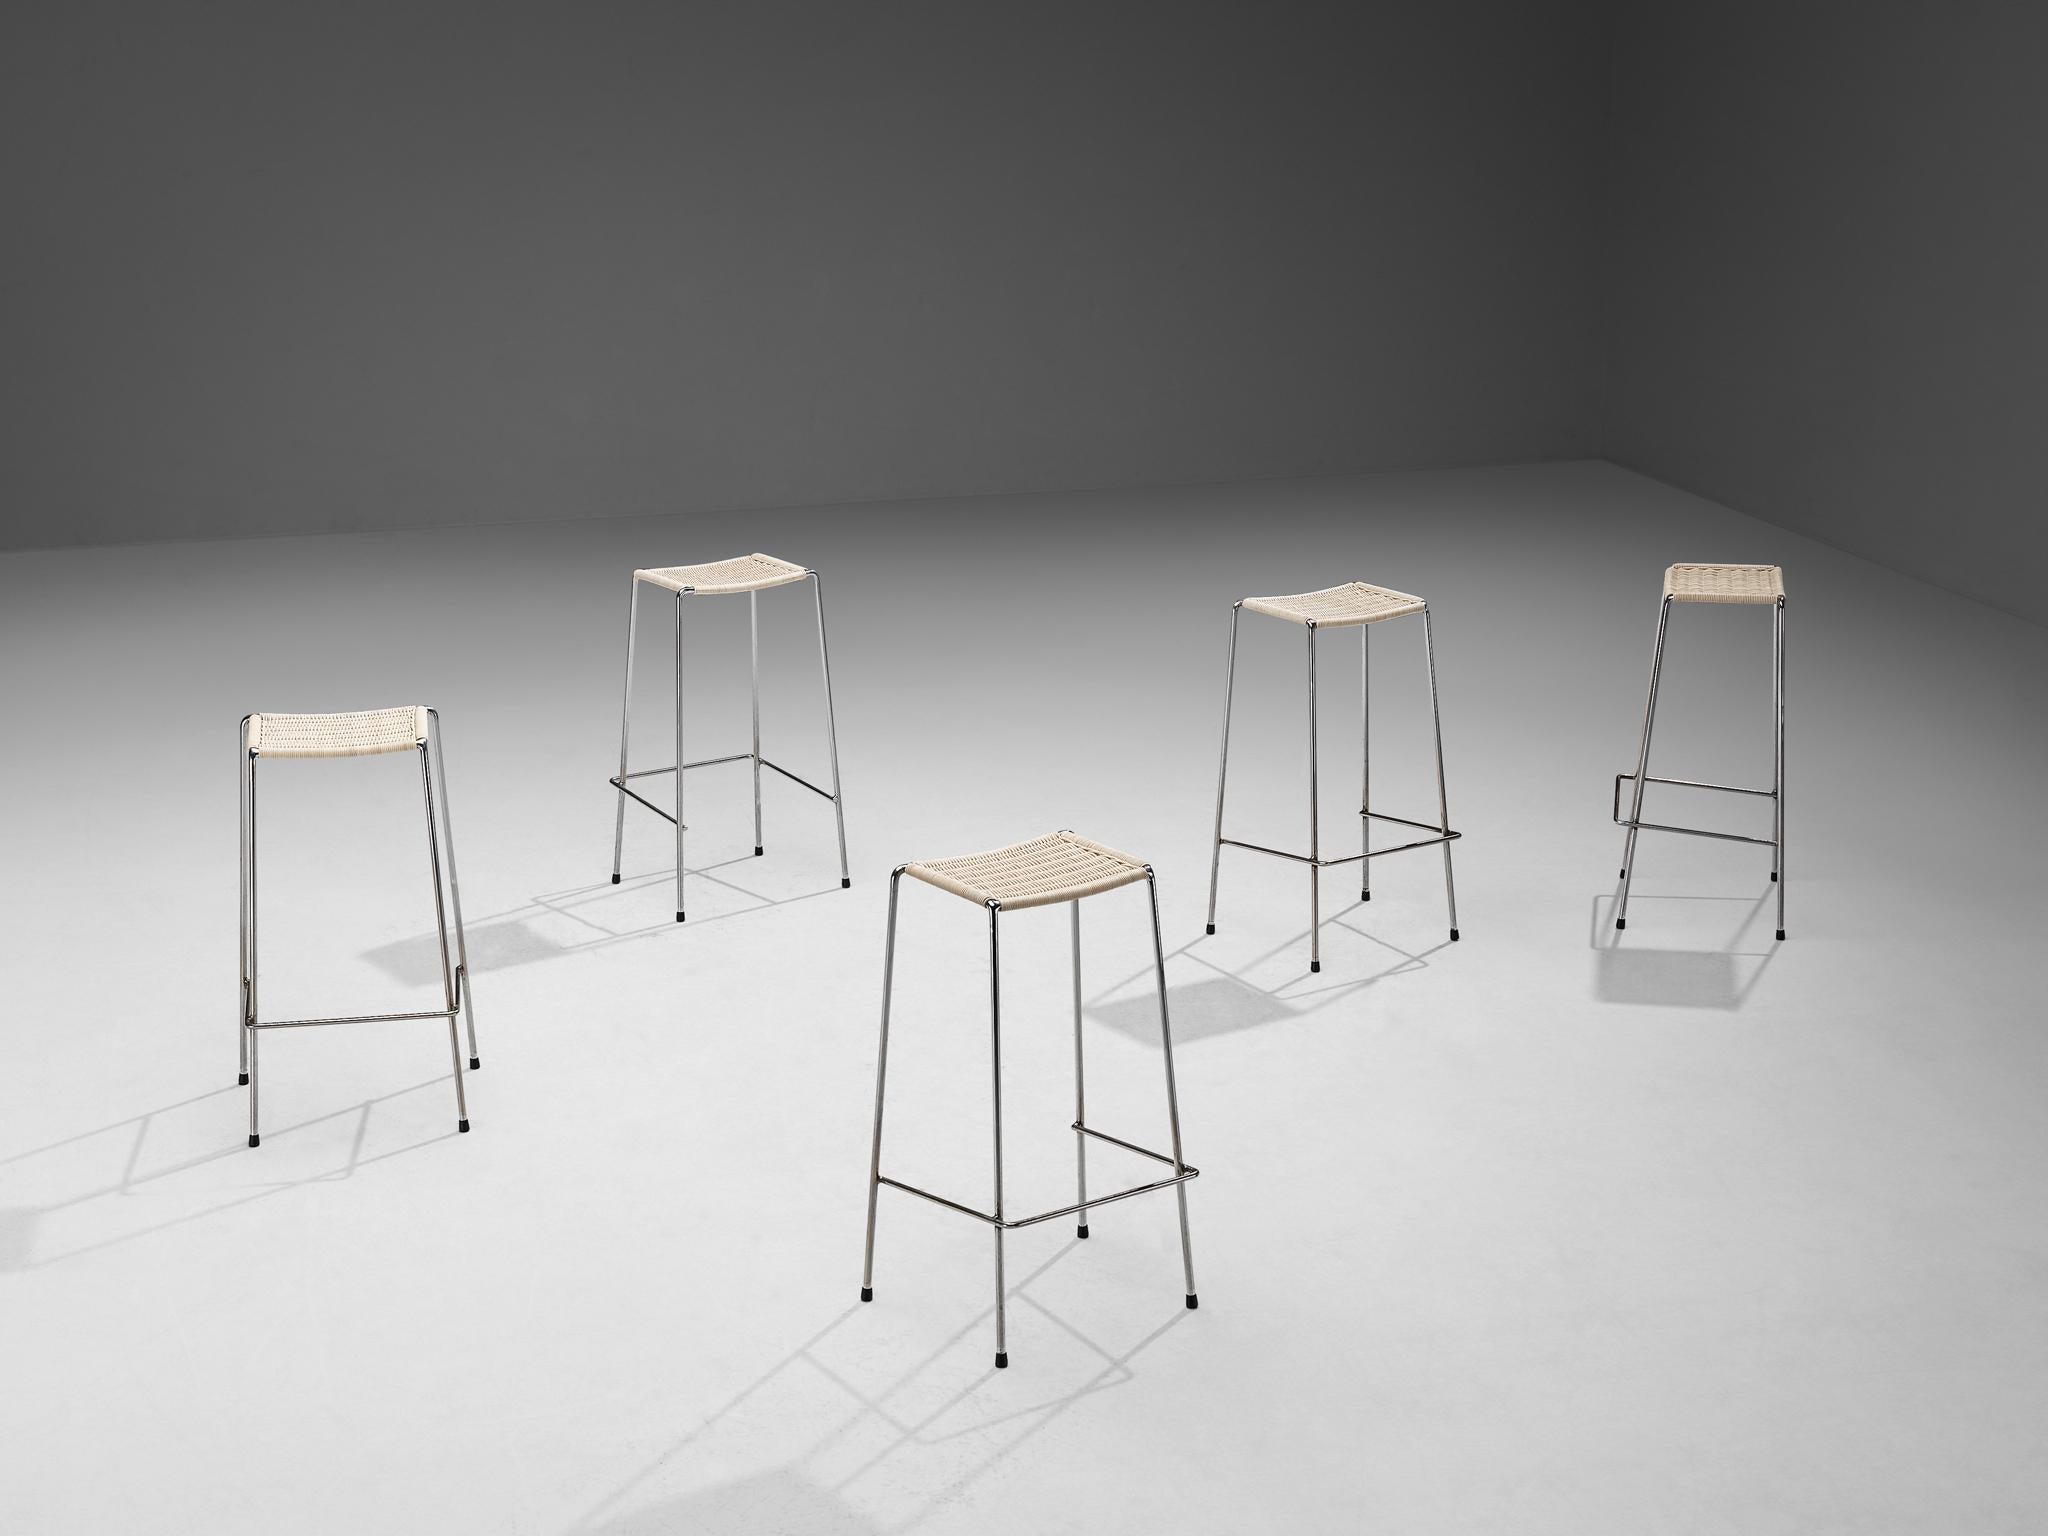 Metz & Co, set of five bar stools, cane, chrome-plated metal, The Netherlands, 1970s. 

Set of five modern bar stools manufactured by the well-known Dutch manufacturer of design furniture Metz & Co. These bar stools feature a slender chrome frame,